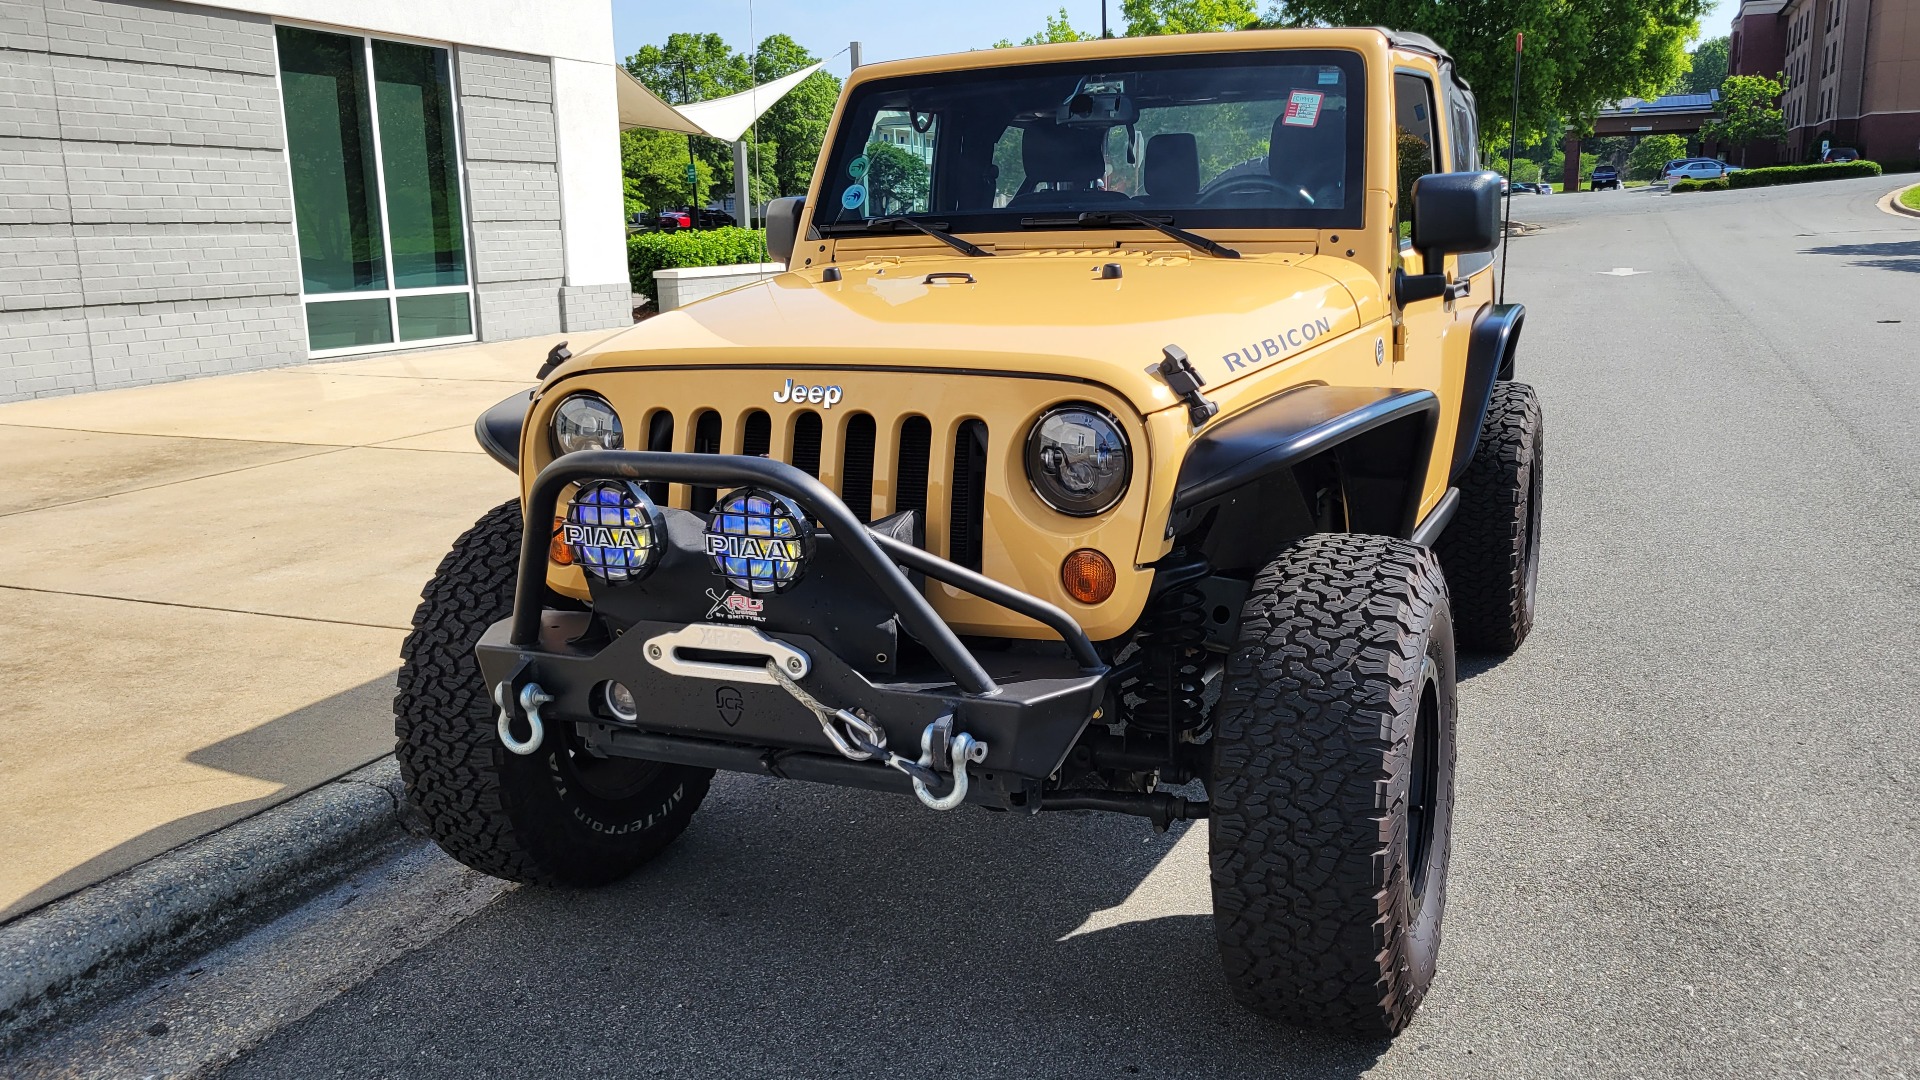 Used 2013 Jeep WRANGLER RUBICON 4X4 / 3.6L V6 / 6-SPD MANUAL / PWR CONV GRP / REARVIEW for sale $28,500 at Formula Imports in Charlotte NC 28227 4